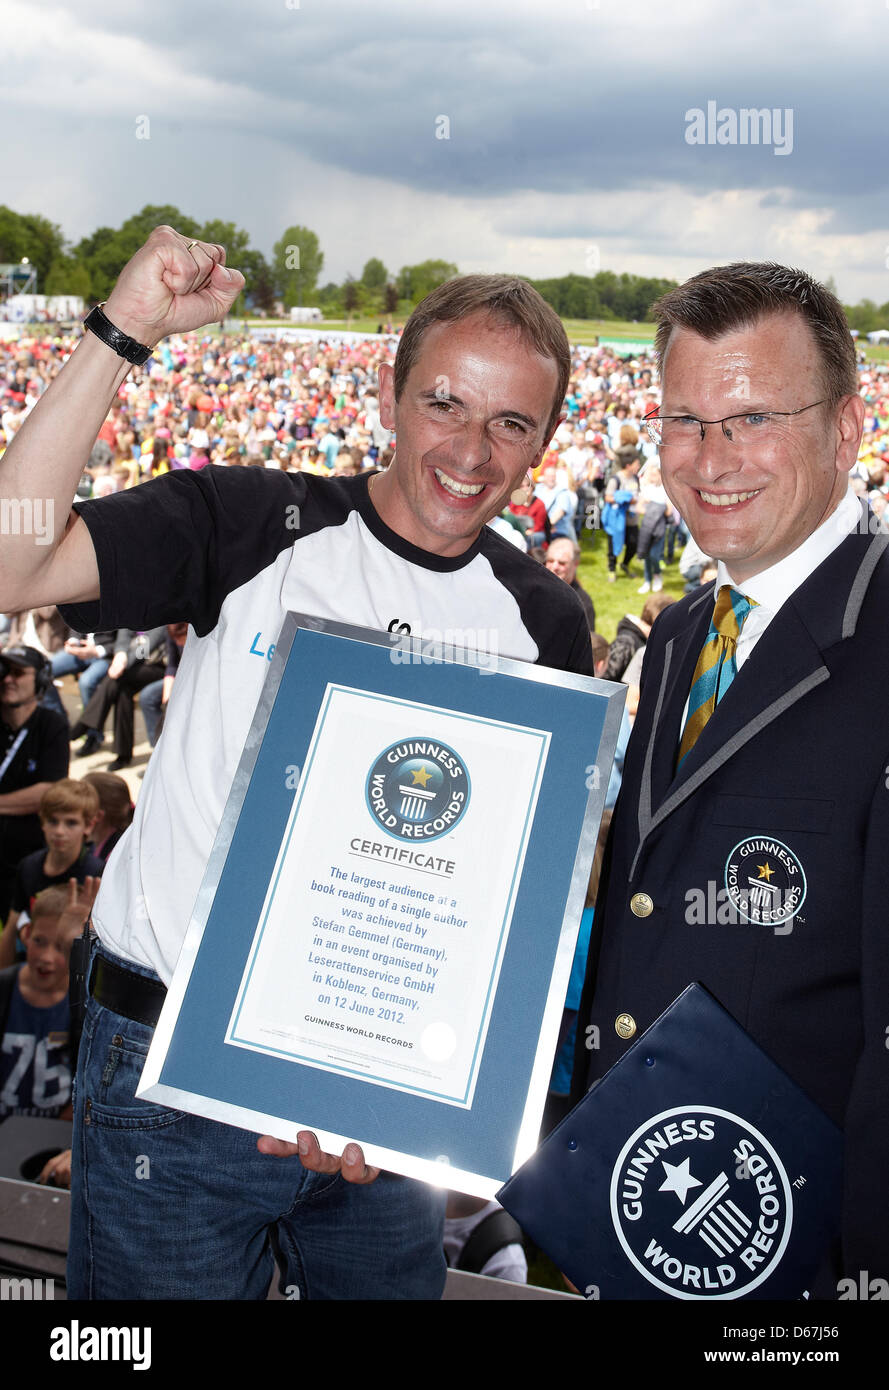 Children's book author Stefan Gemmel (L) receives the certificate for the read aloud world record from Guinness World Record judge Olaf Kuchenbecker in Koblenz, Germany, 12 June 2012. 5400 children were read to aloud by Gemmel for about one hour. This was the biggest crowd ever to listen to a reading of a single author in Koblenz. Photo: Thomas Frey Stock Photo